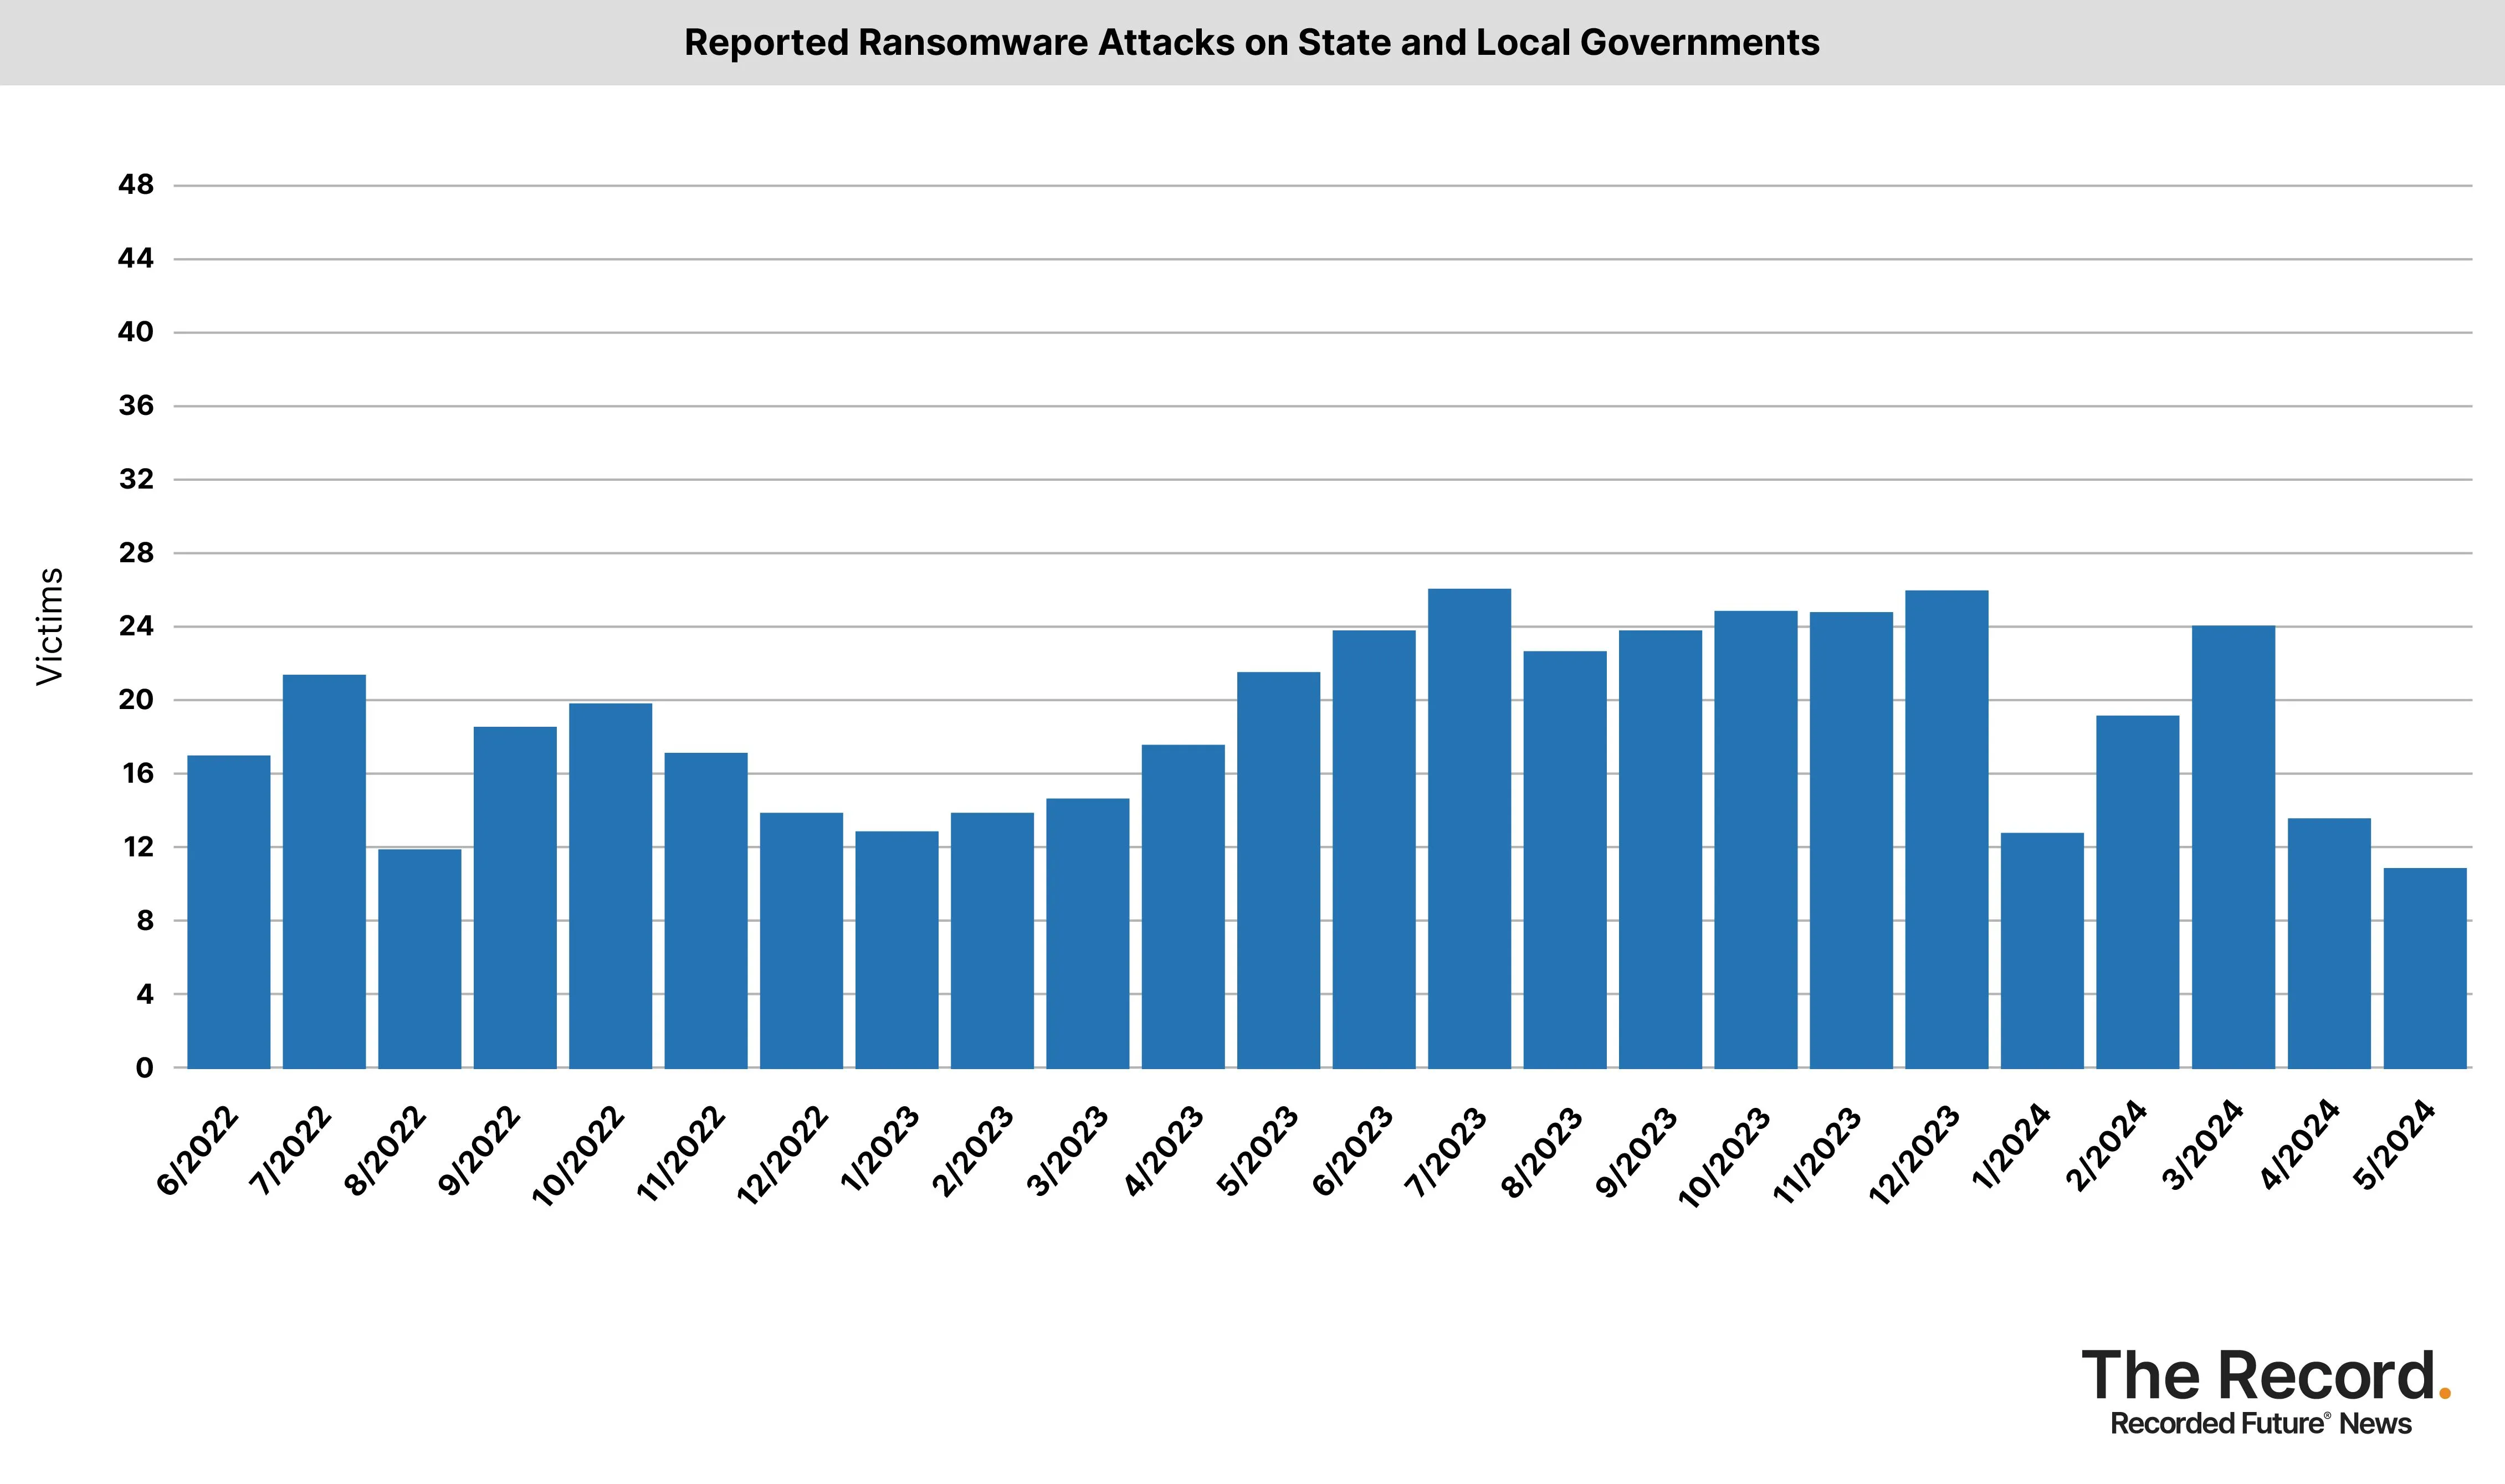 2024_0607 - Ransomware Tracker_Reported Ransomware Attacks on State and Local Governments.jpg